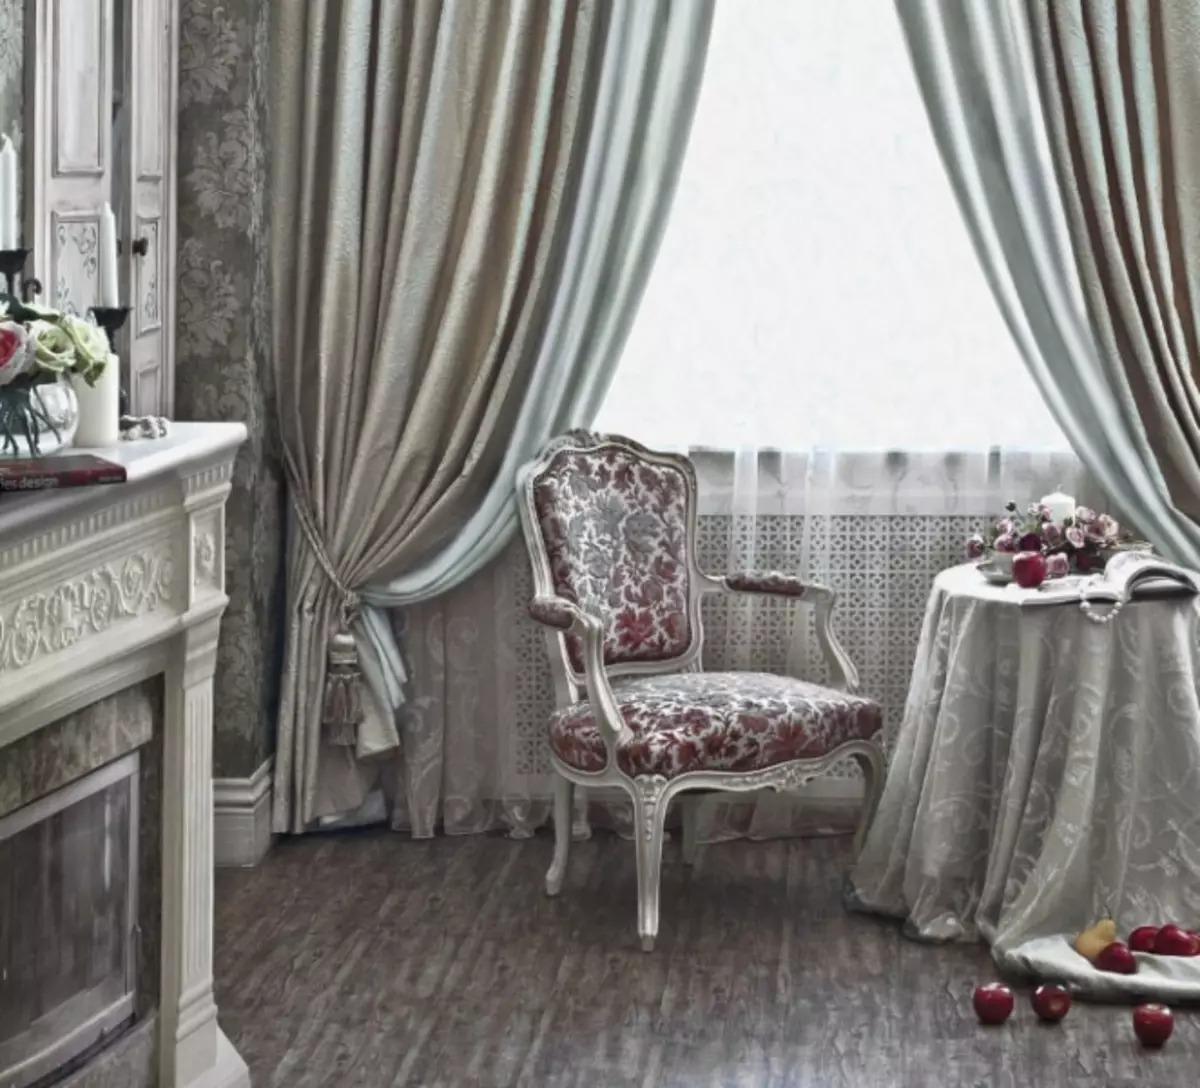 How to choose the right color and style curtains for the hall